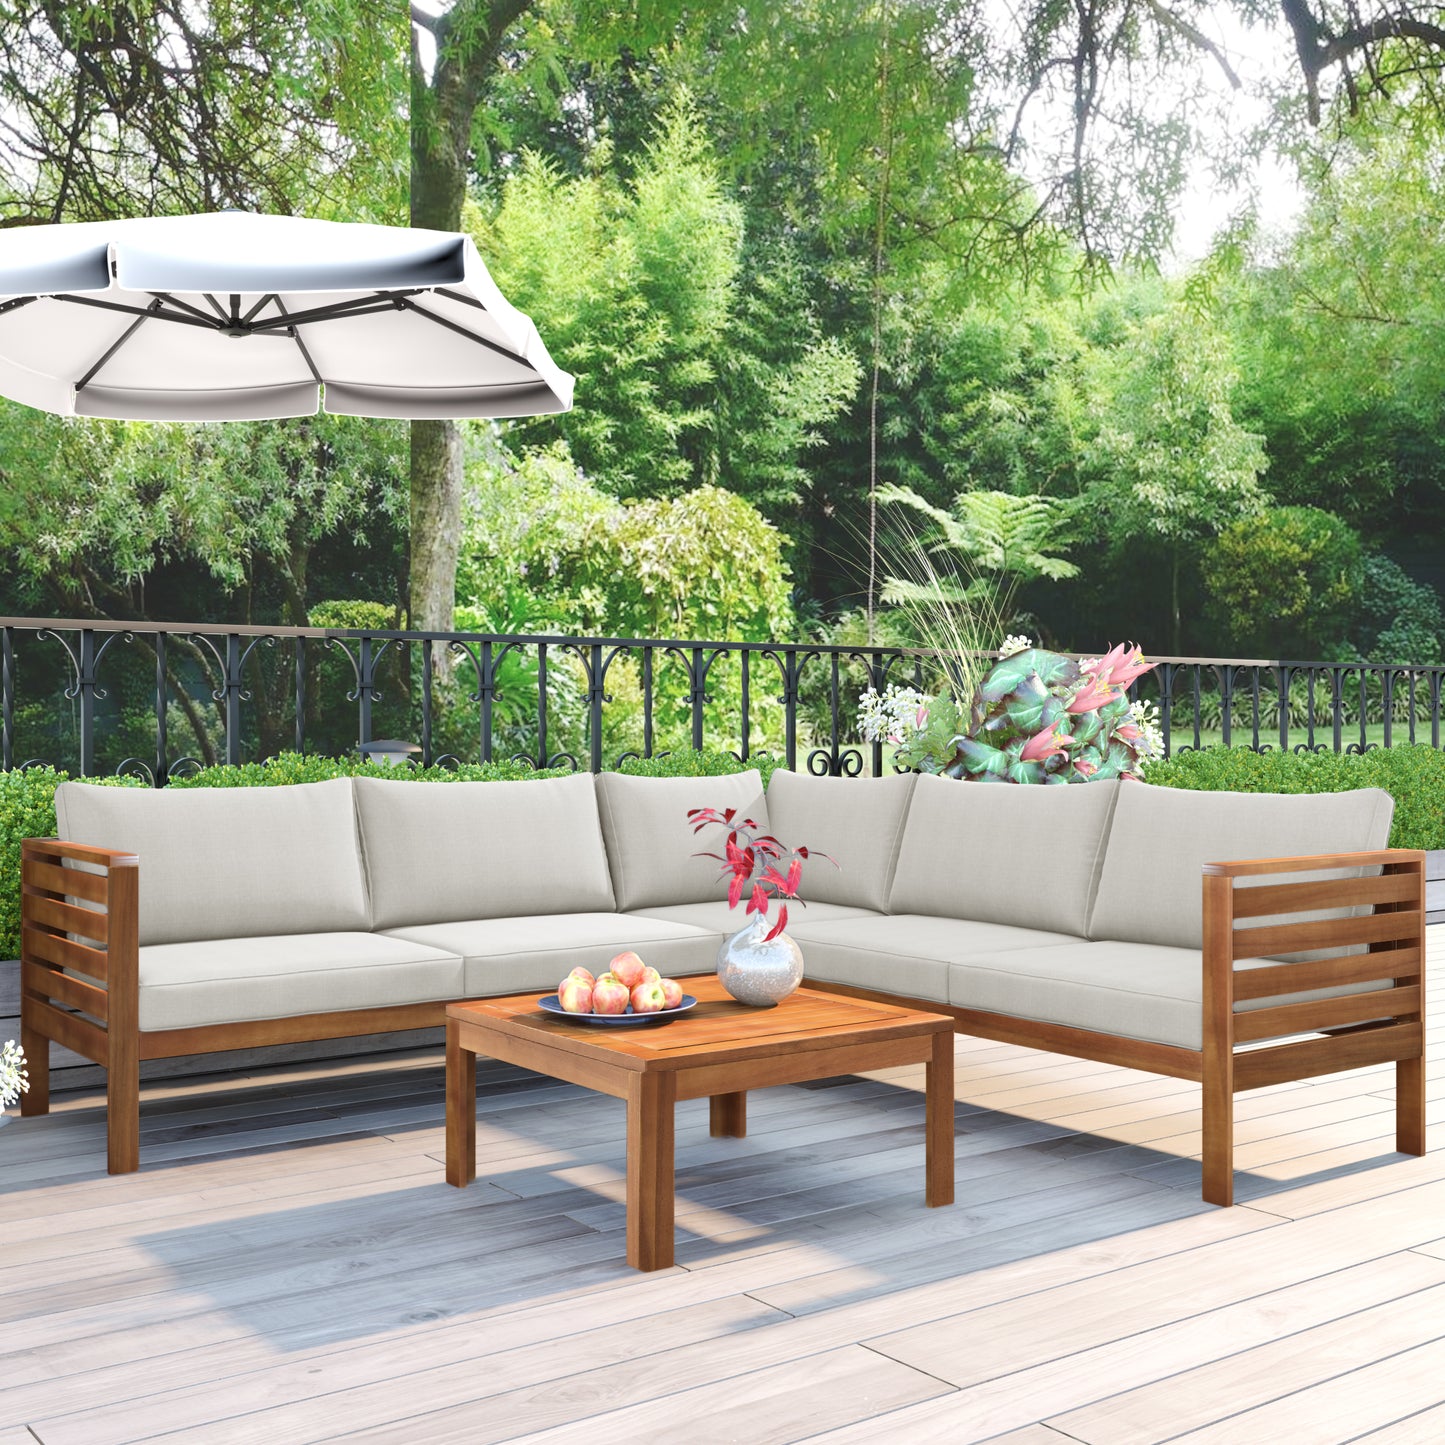 4 Piece Wood Patio Furniture Set, Outdoor Seating Chat Set with Beige Cushions, Sectional Conversation Sofa Chairs Set with Coffee Table, for Balcony, Backyard, Poolside, Deck, Garden, D7487